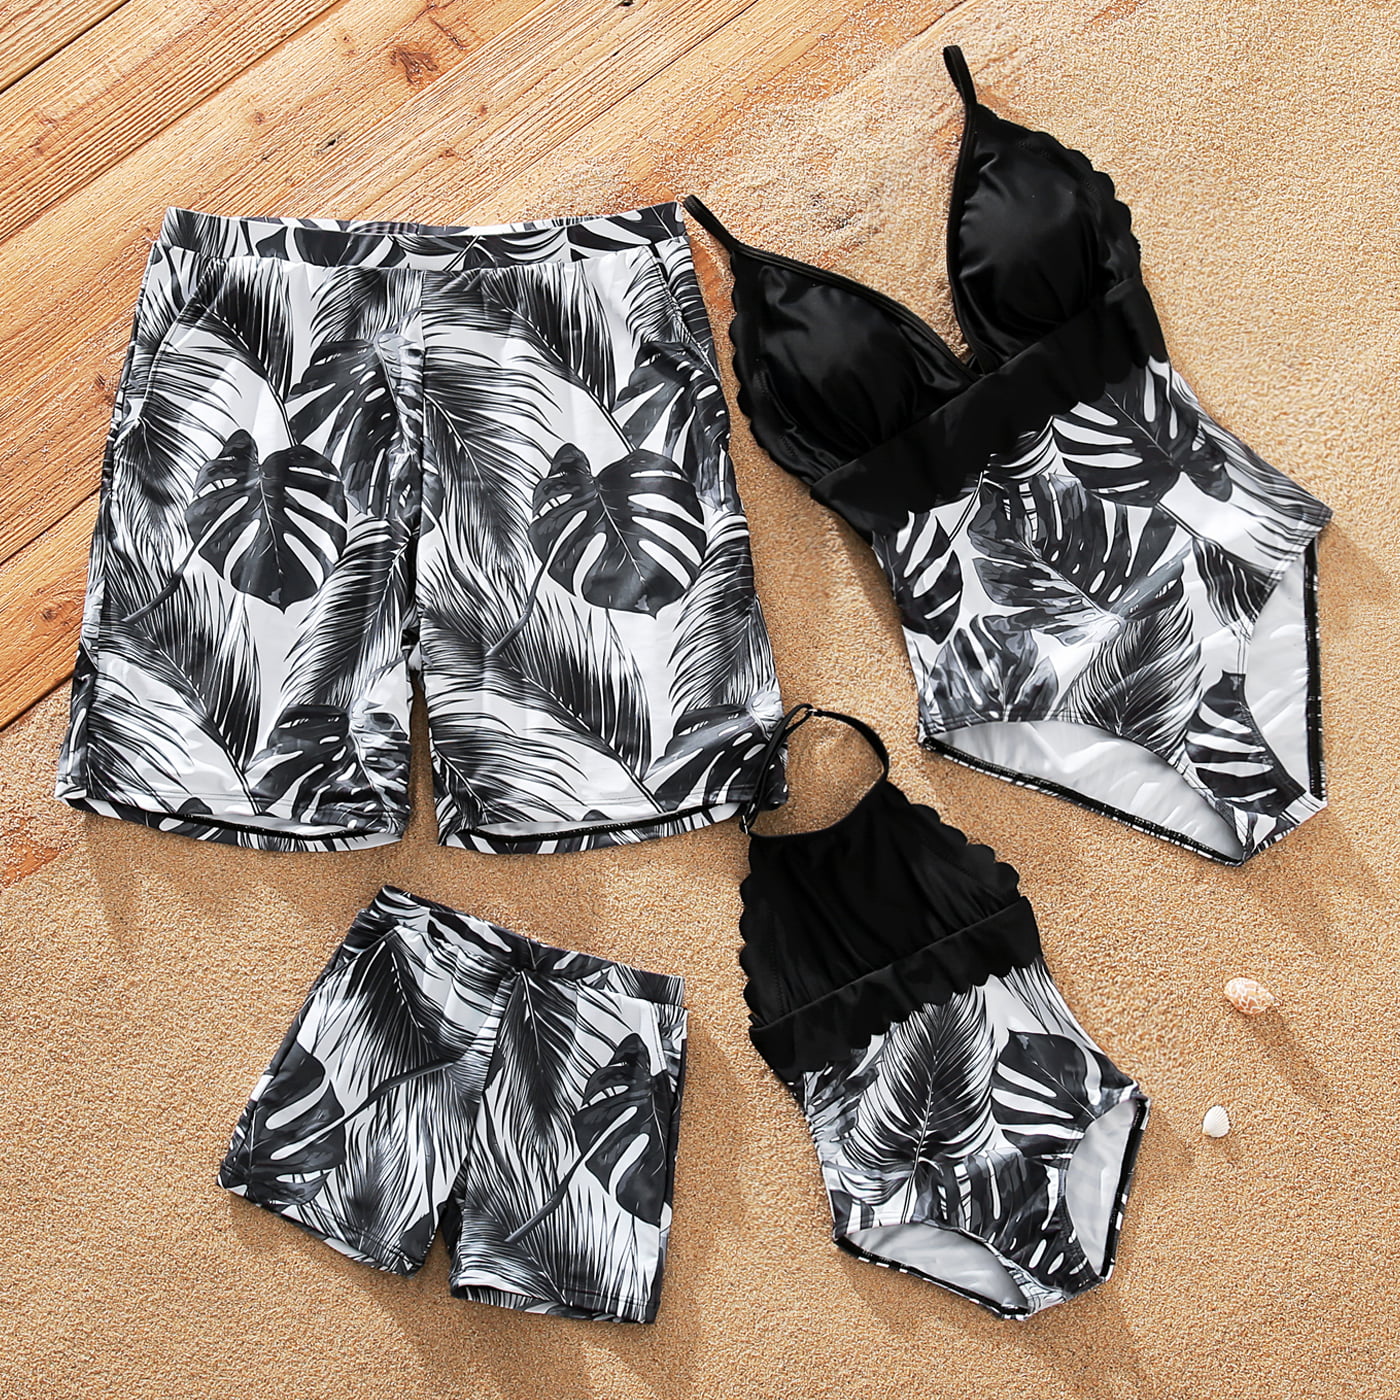 a matching set of family swimsuits with a black and white tropical floral print